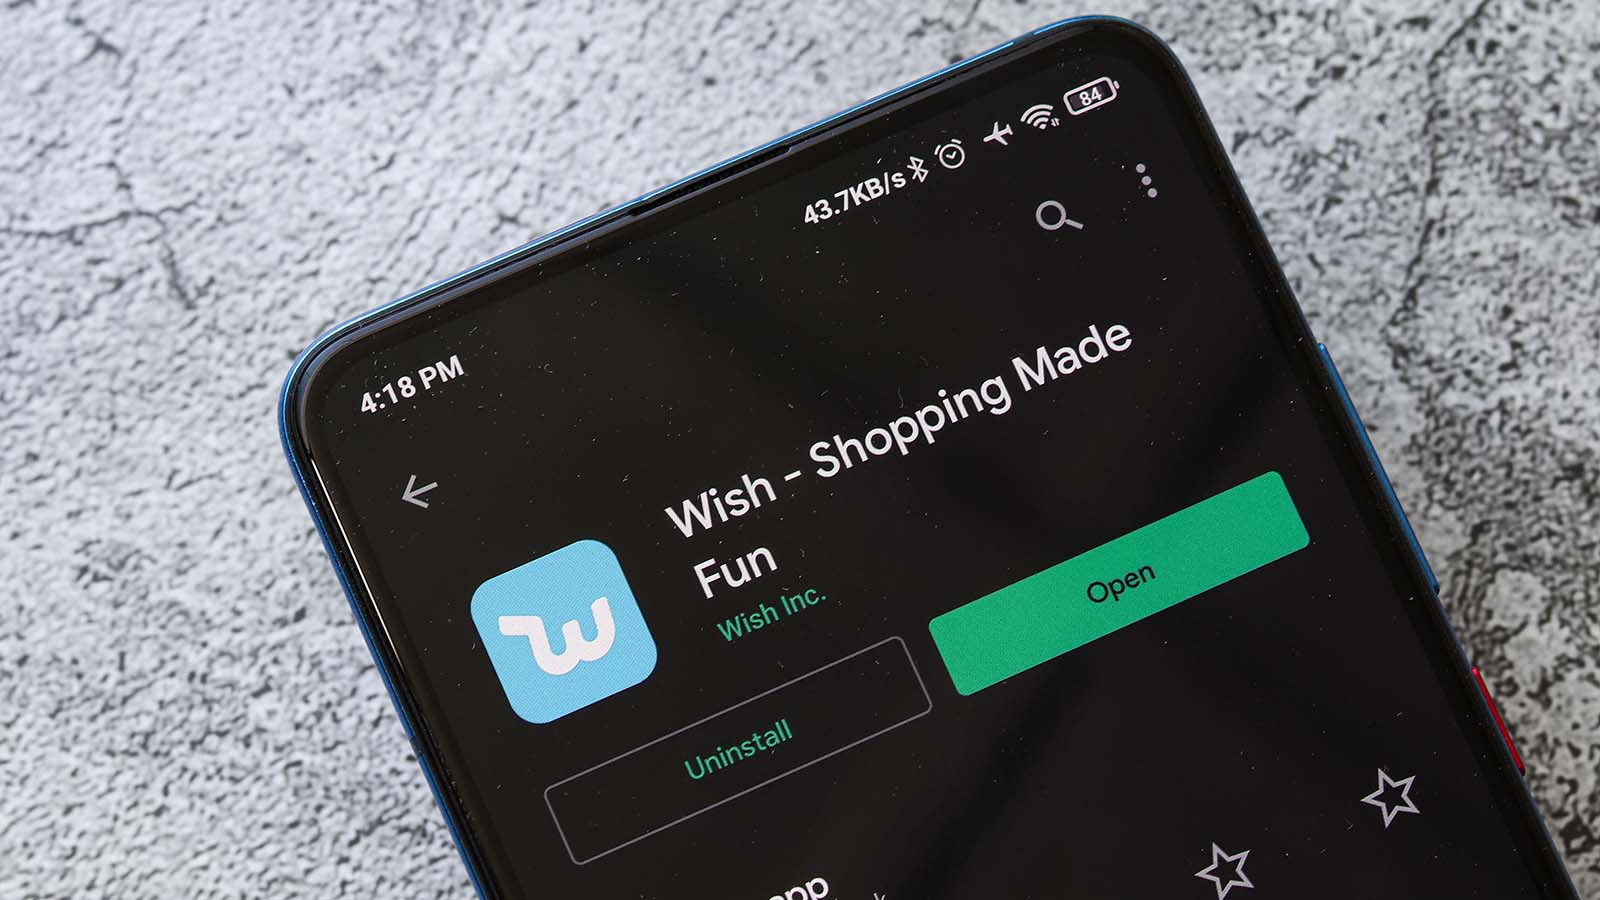 The logo and information for the Wish (WISH stock) mobile app are displayed on a smartphone.